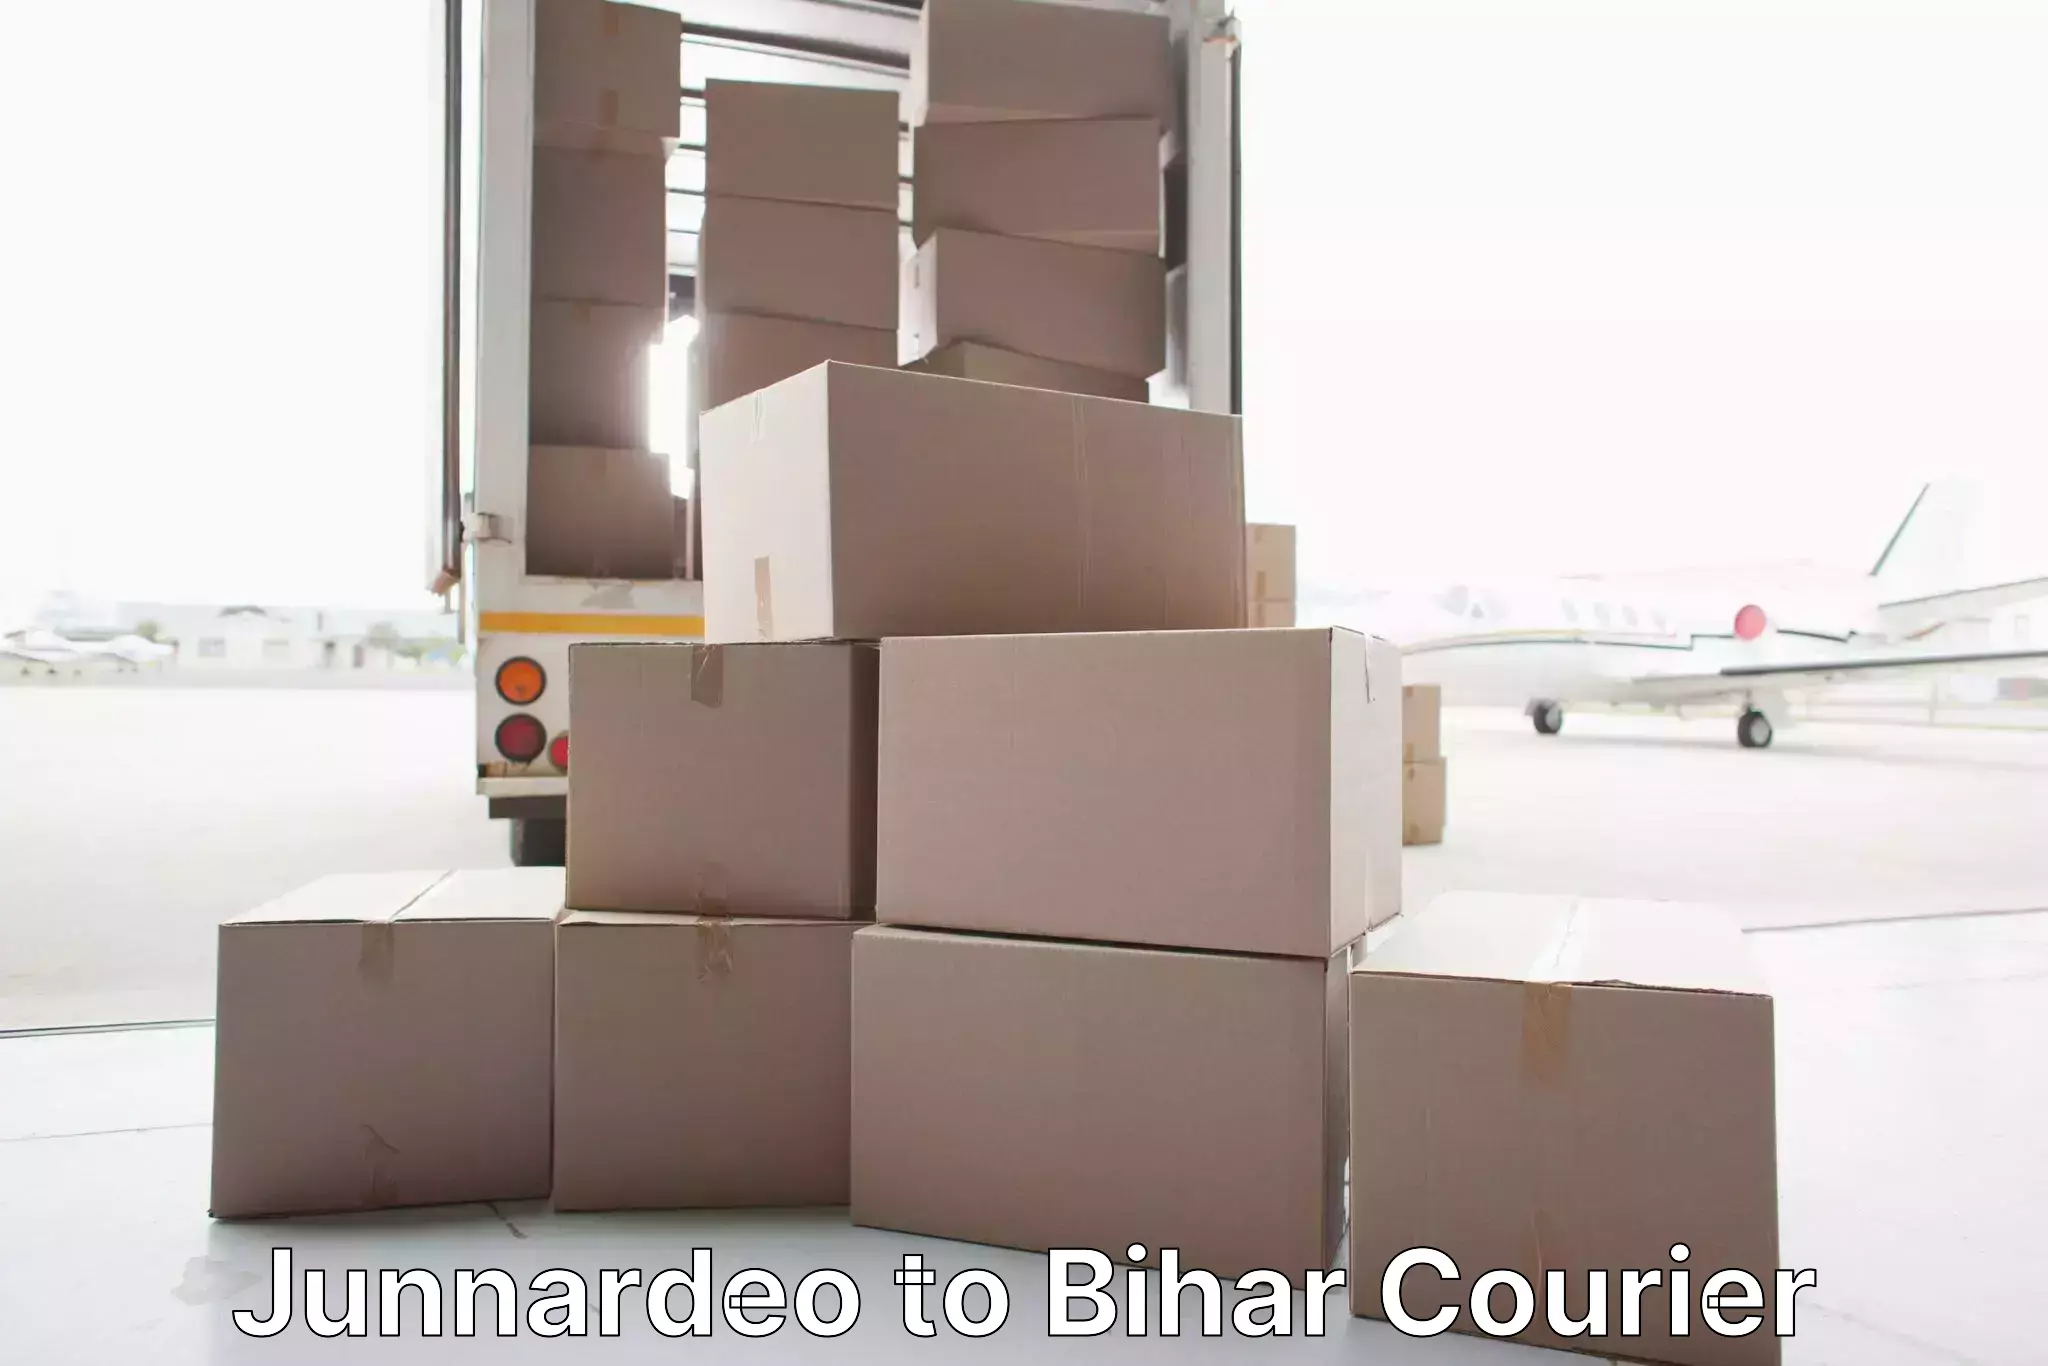 Household moving experts Junnardeo to Bihar